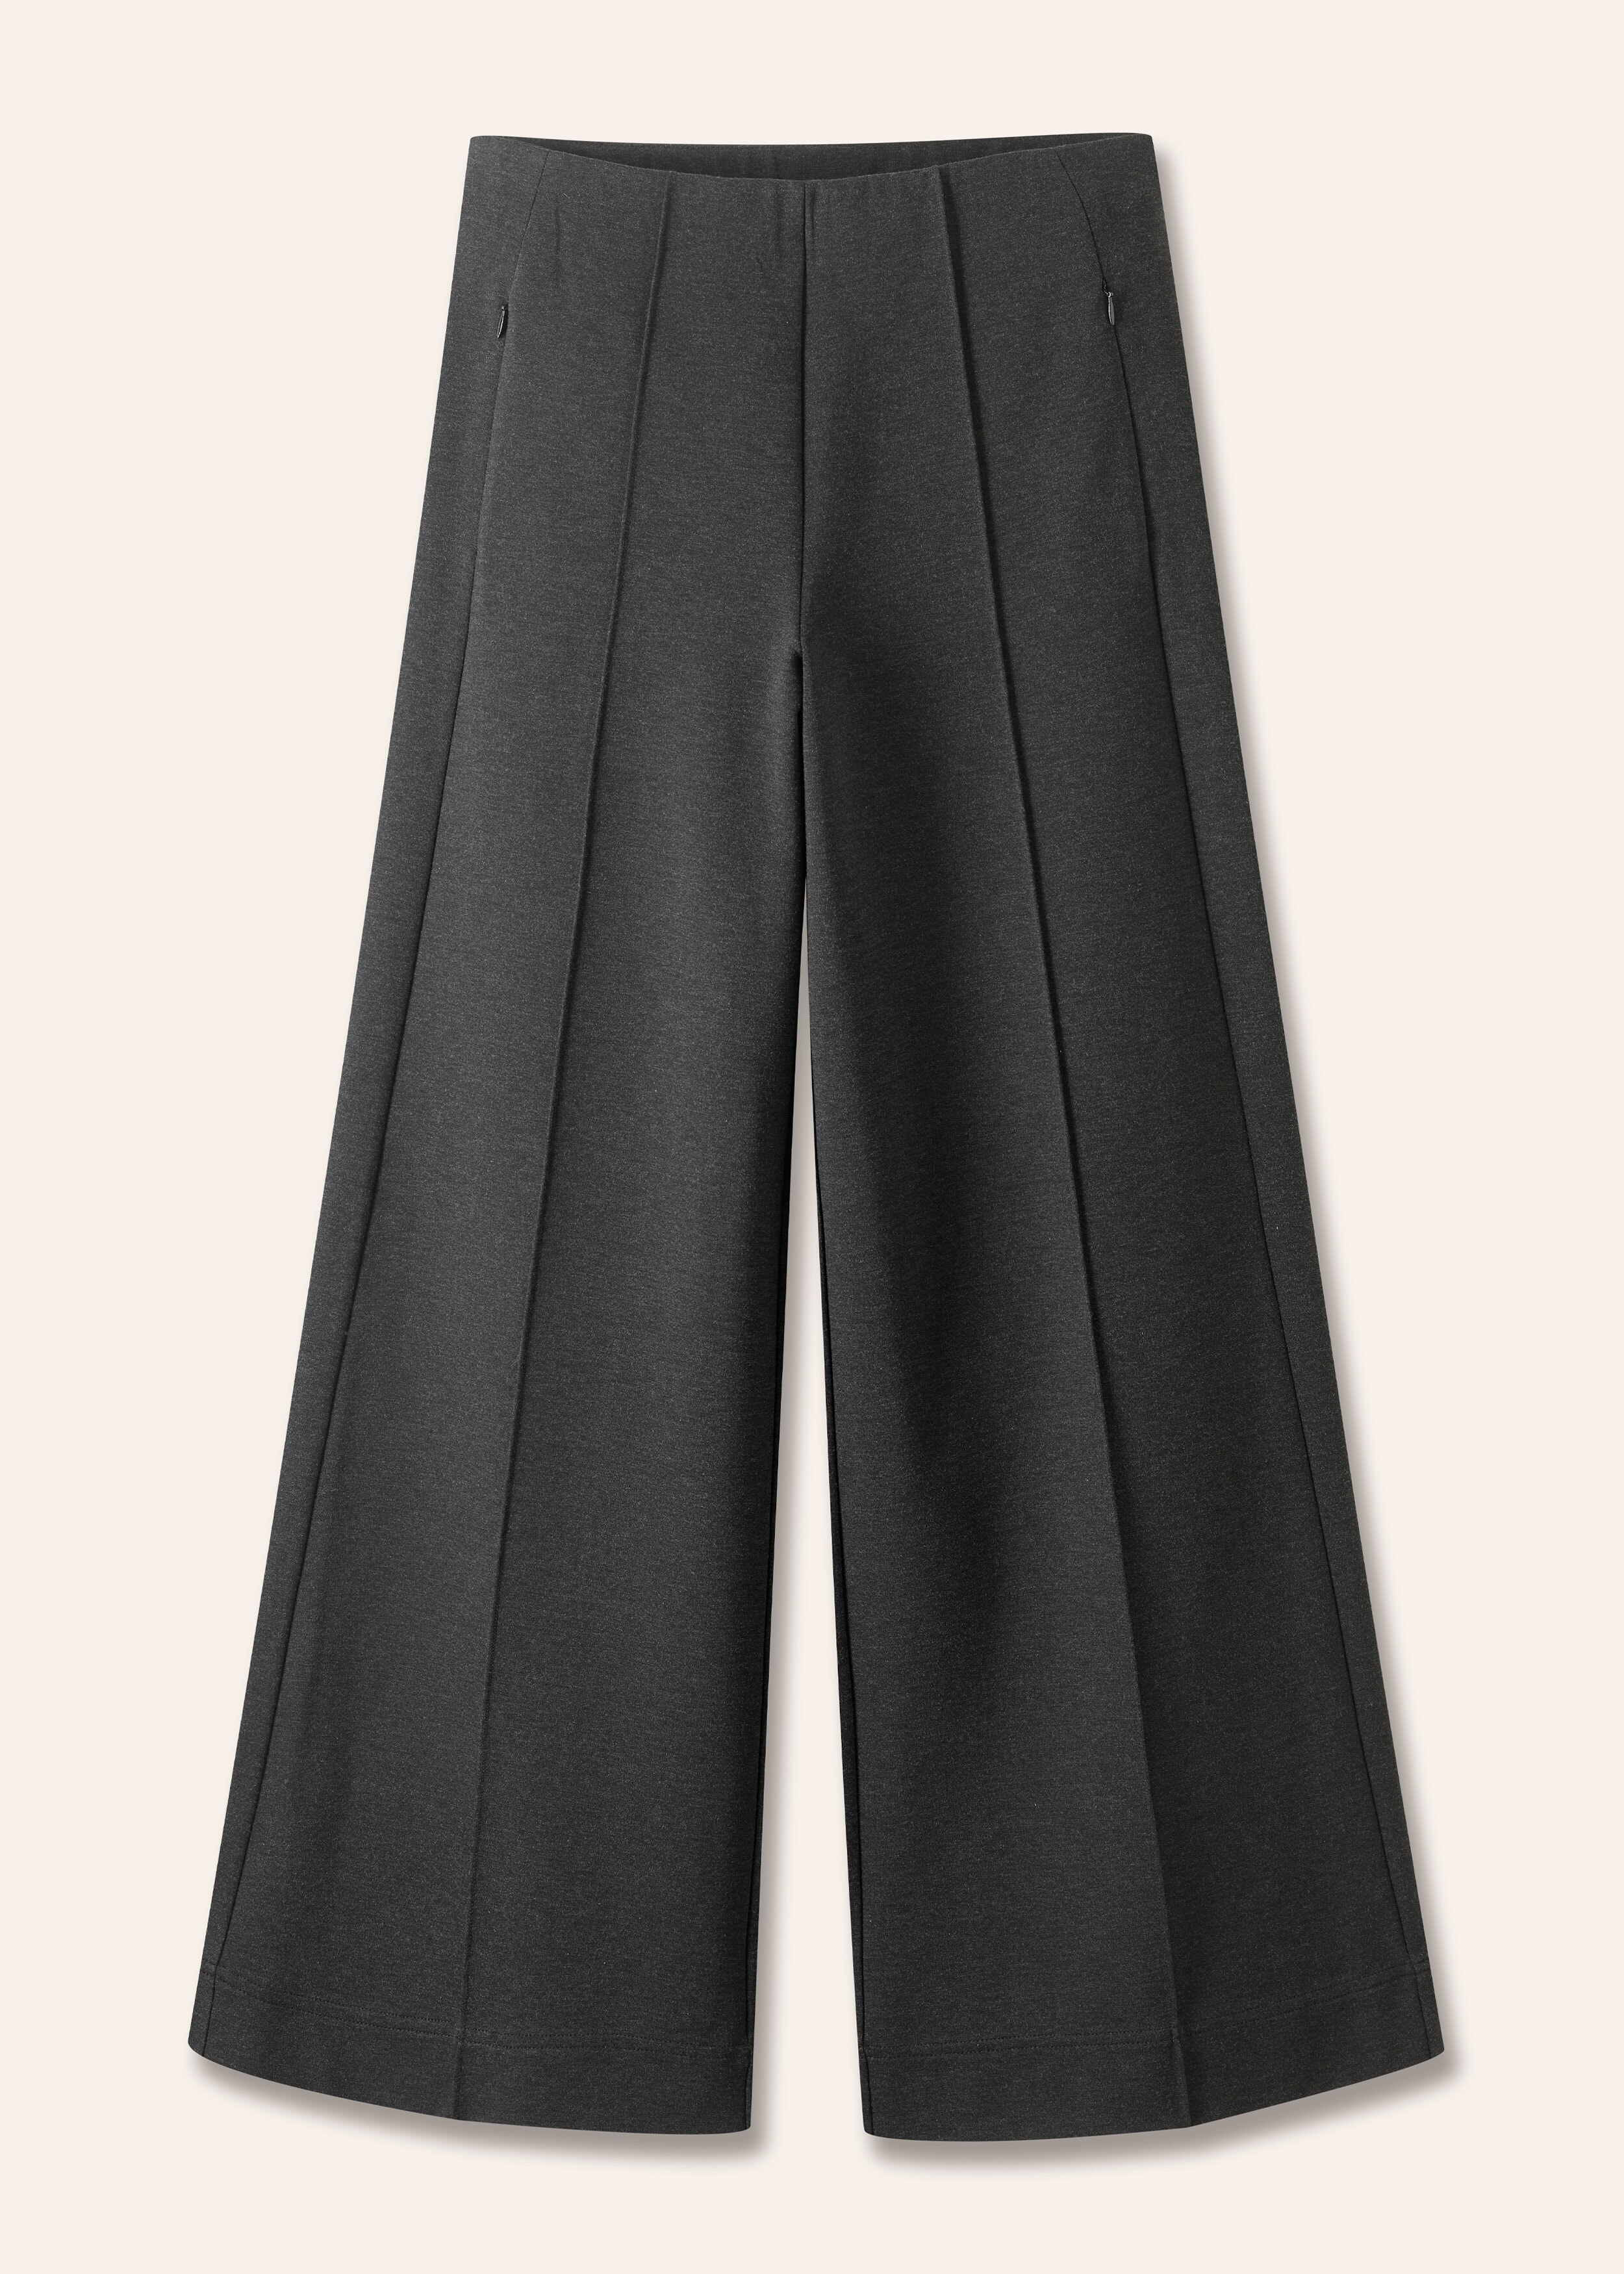 Perfect Simplicity Tailored Palazzo Charcoal Marl